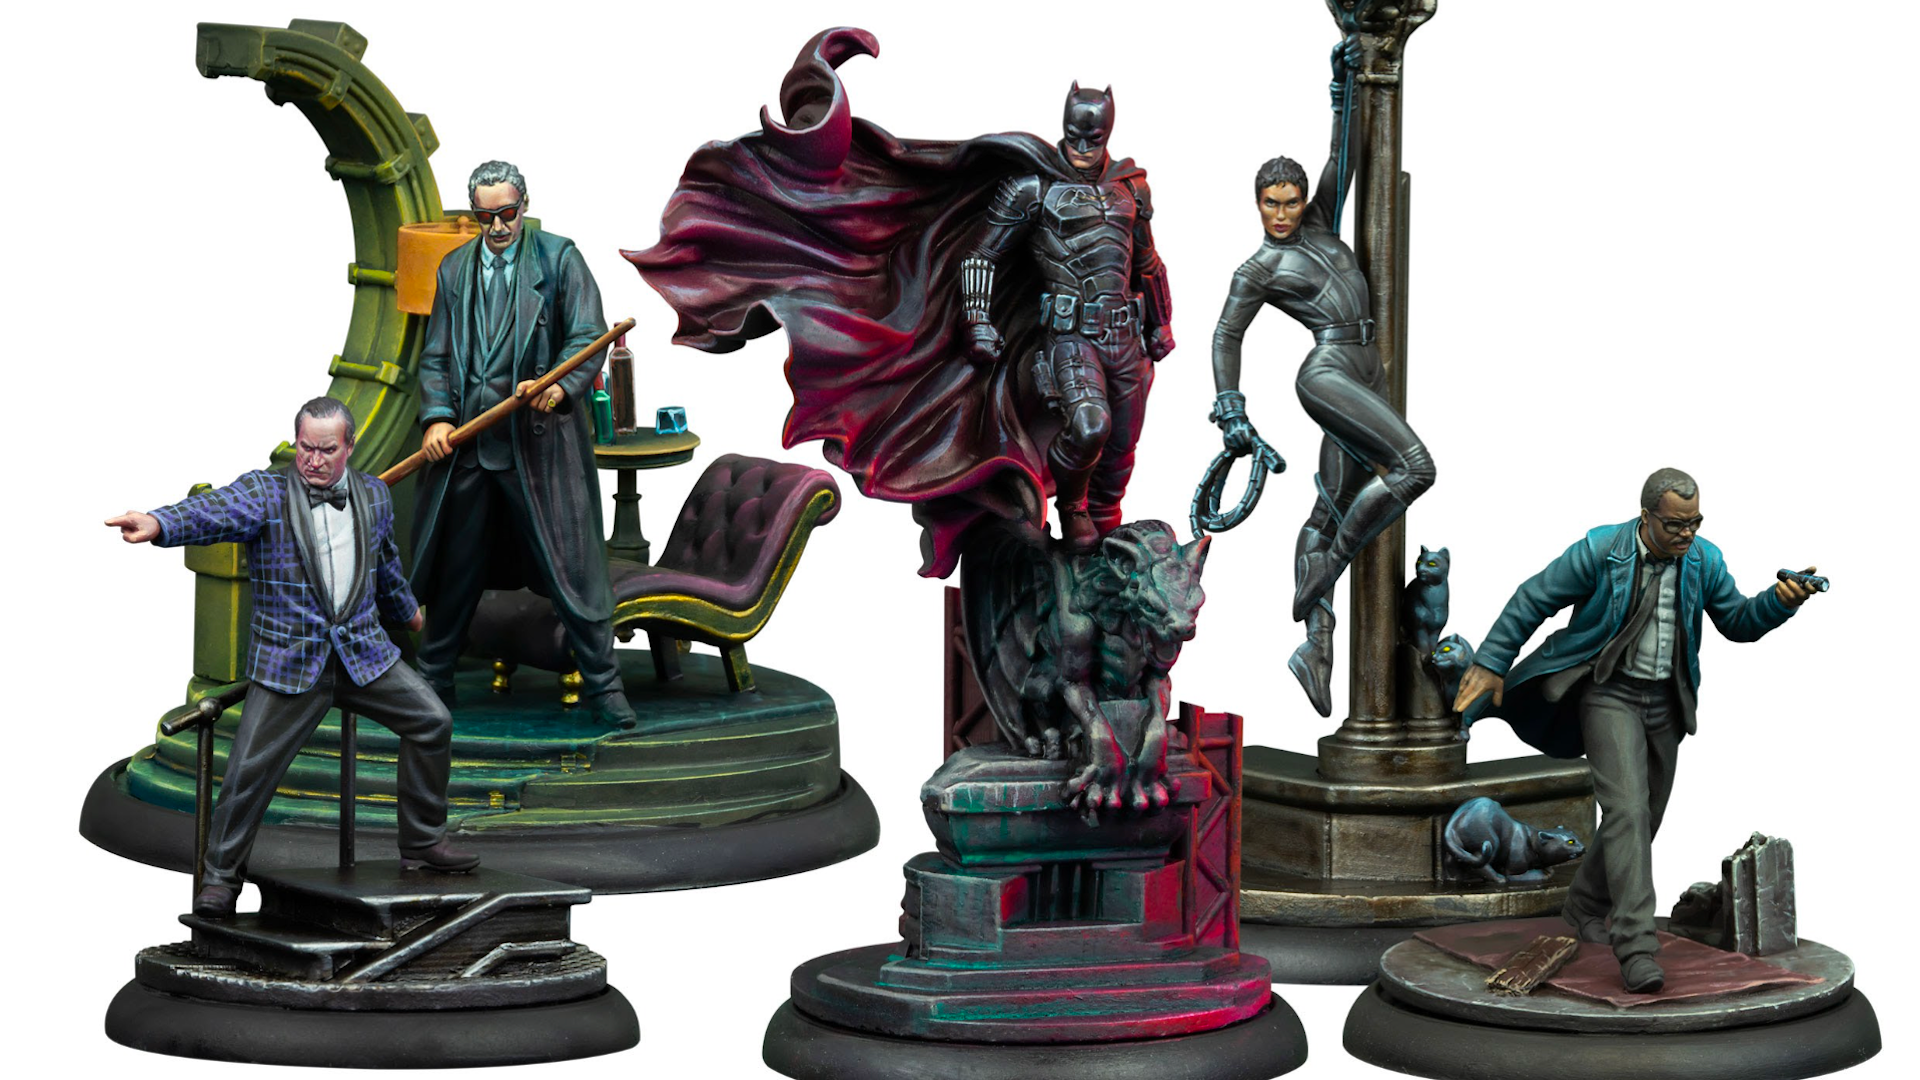 A display of painted miniatures from the Batman Miniature Game, including The Penguin, Carmine Falcone, Batman, Catwoman and Commissioner Jim Gordon. Specifically, the minis use the version from new film, The Batman.